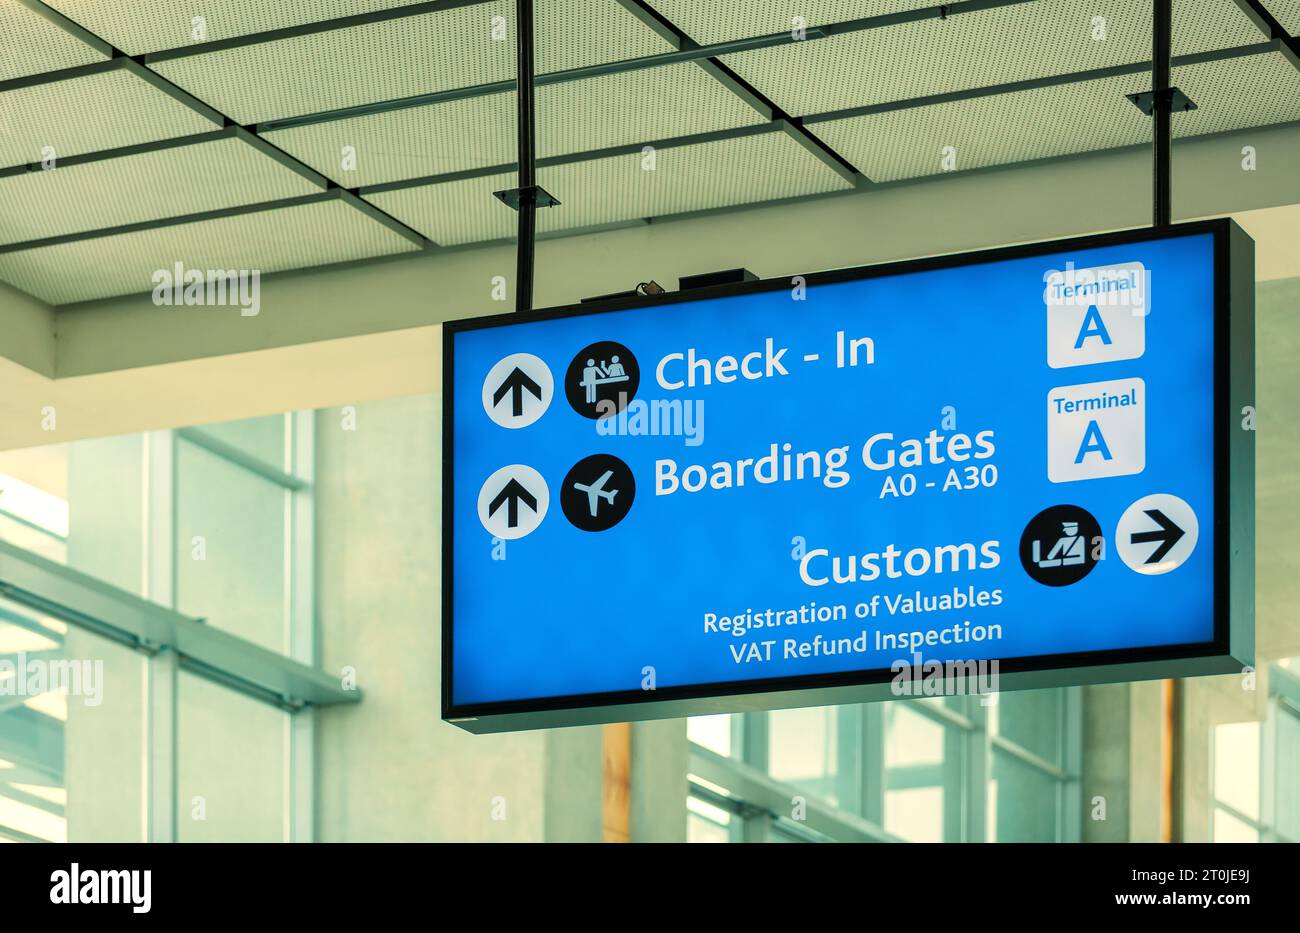 Info sign at international airport - Directions for check in and boarding gates - Registrations and custom at terminal connections Stock Photo